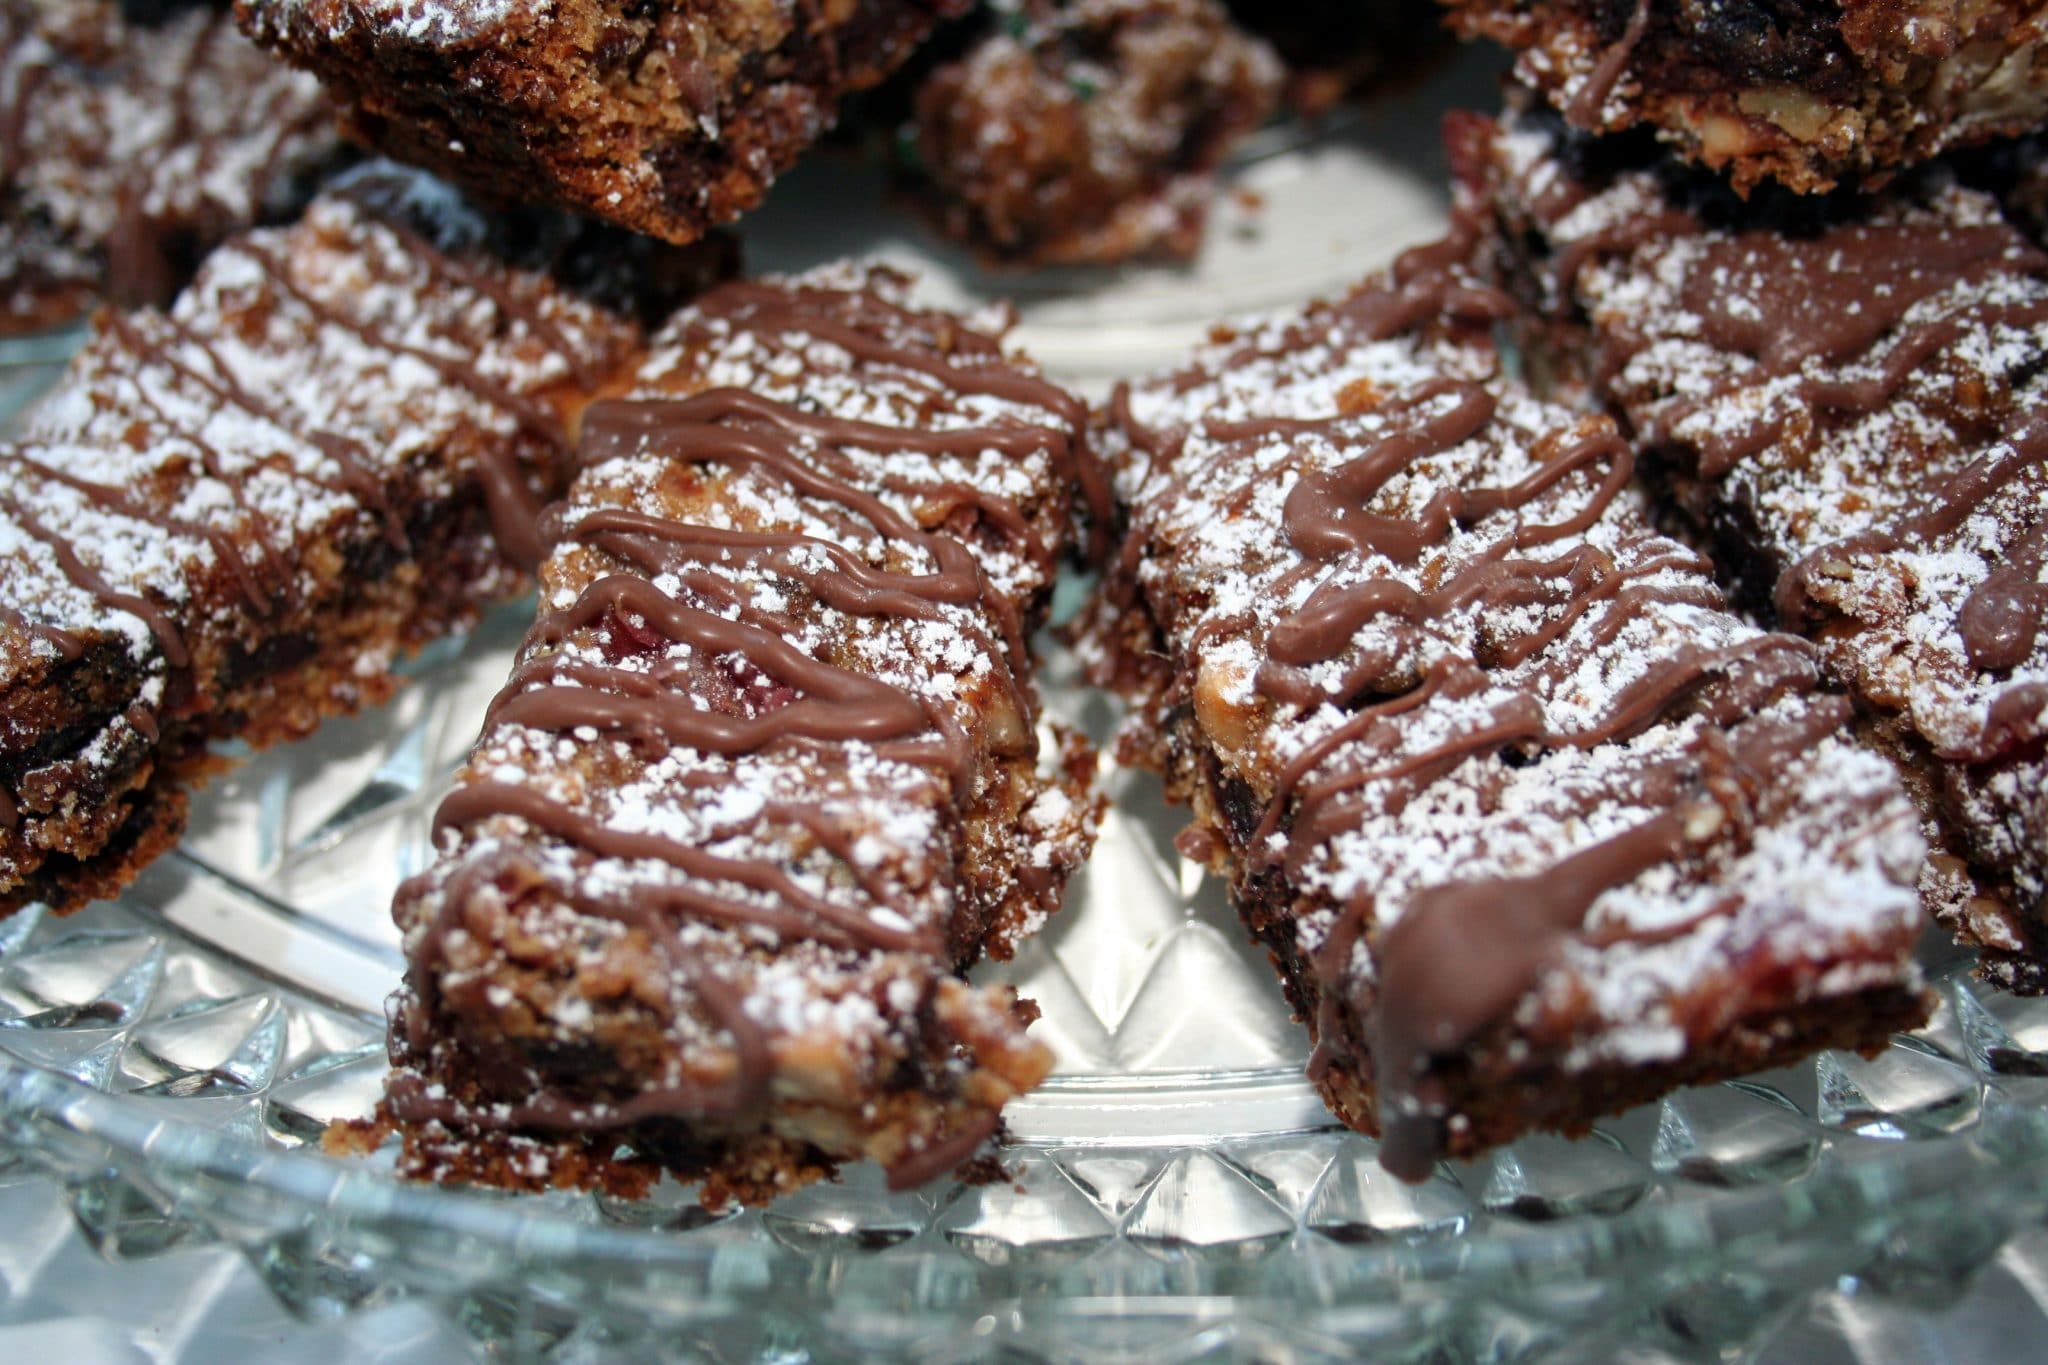 Plate of Vegan Jubilee Bars with chocolate drizzle and powdered sugar